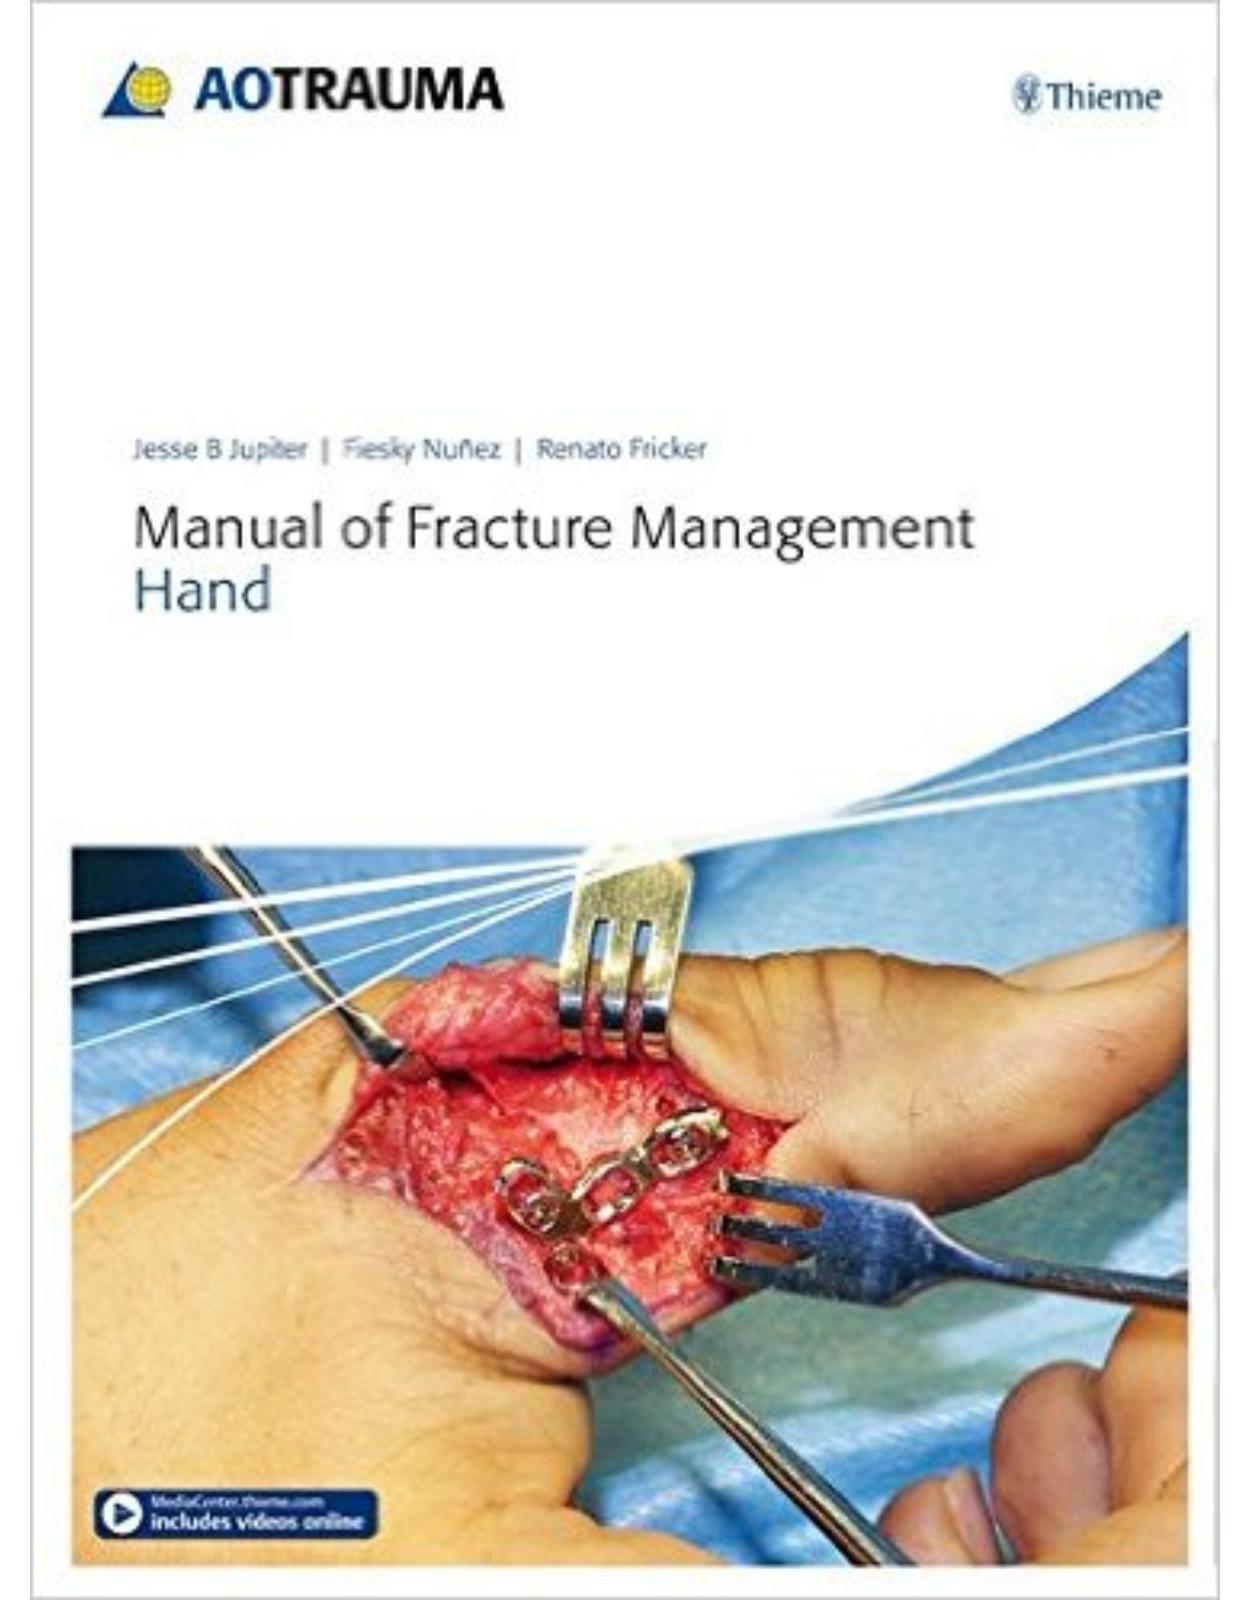 Manual of Fracture Management – Hand